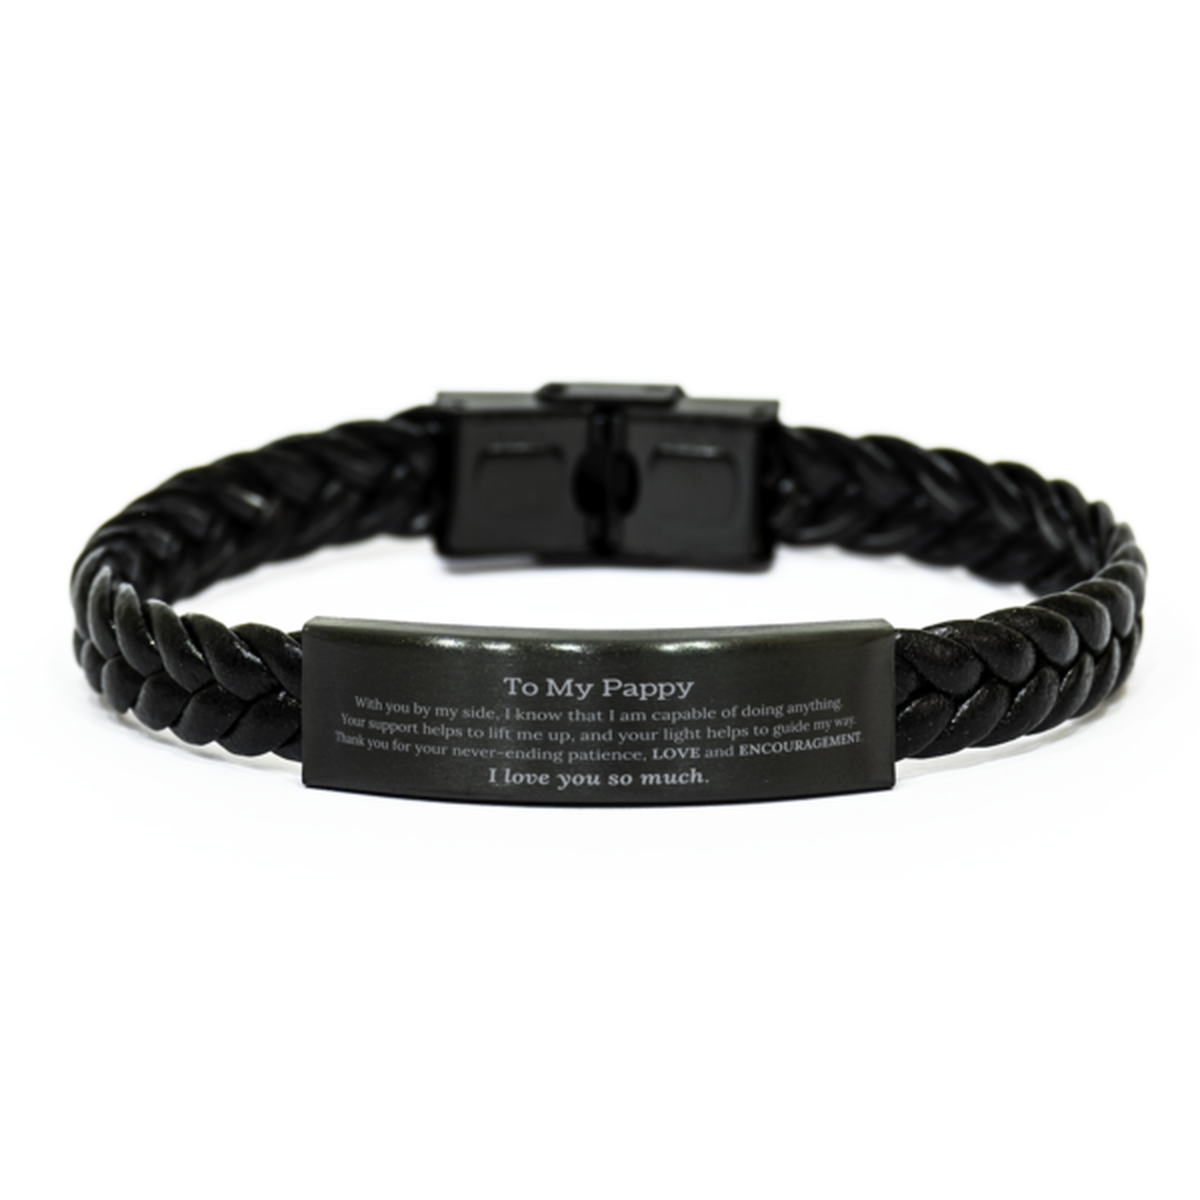 Appreciation Pappy Braided Leather Bracelet Gifts, To My Pappy Birthday Christmas Wedding Keepsake Gifts for Pappy With you by my side, I know that I am capable of doing anything. I love you so much